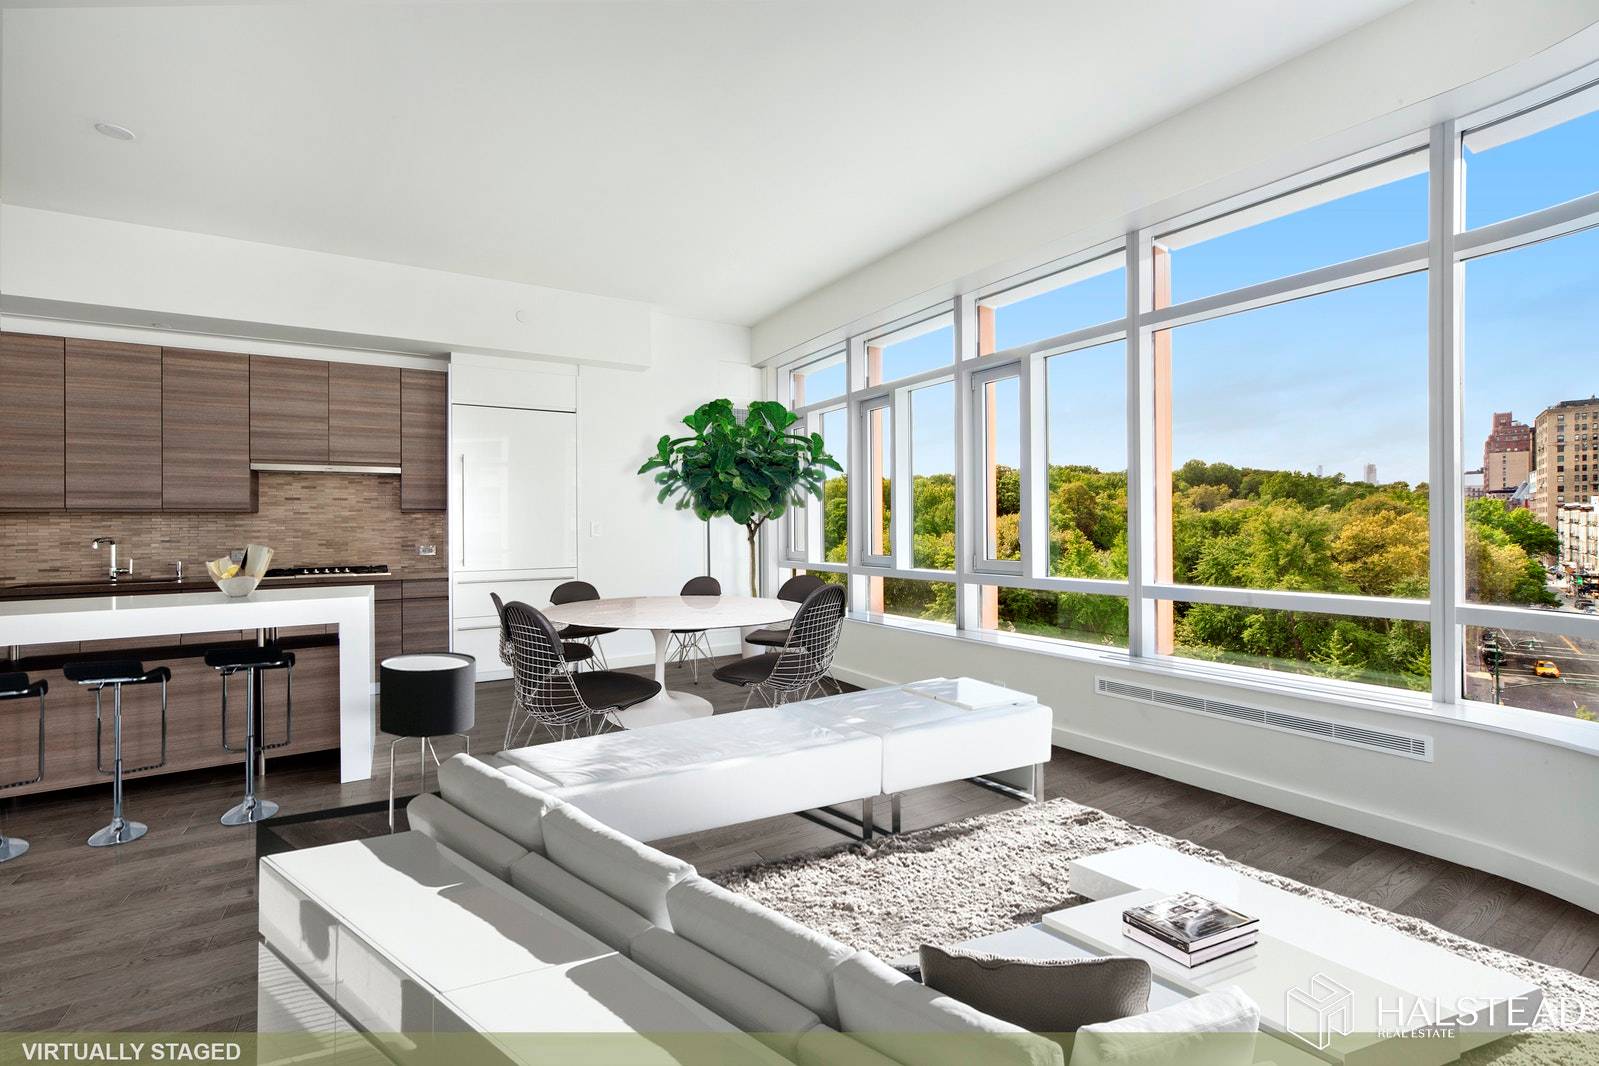 This 3 bedroom condo with 1, 577 square feet is sun drenched throughout with an abundance of over sized picture windows that provide spectacular views of Central Park.